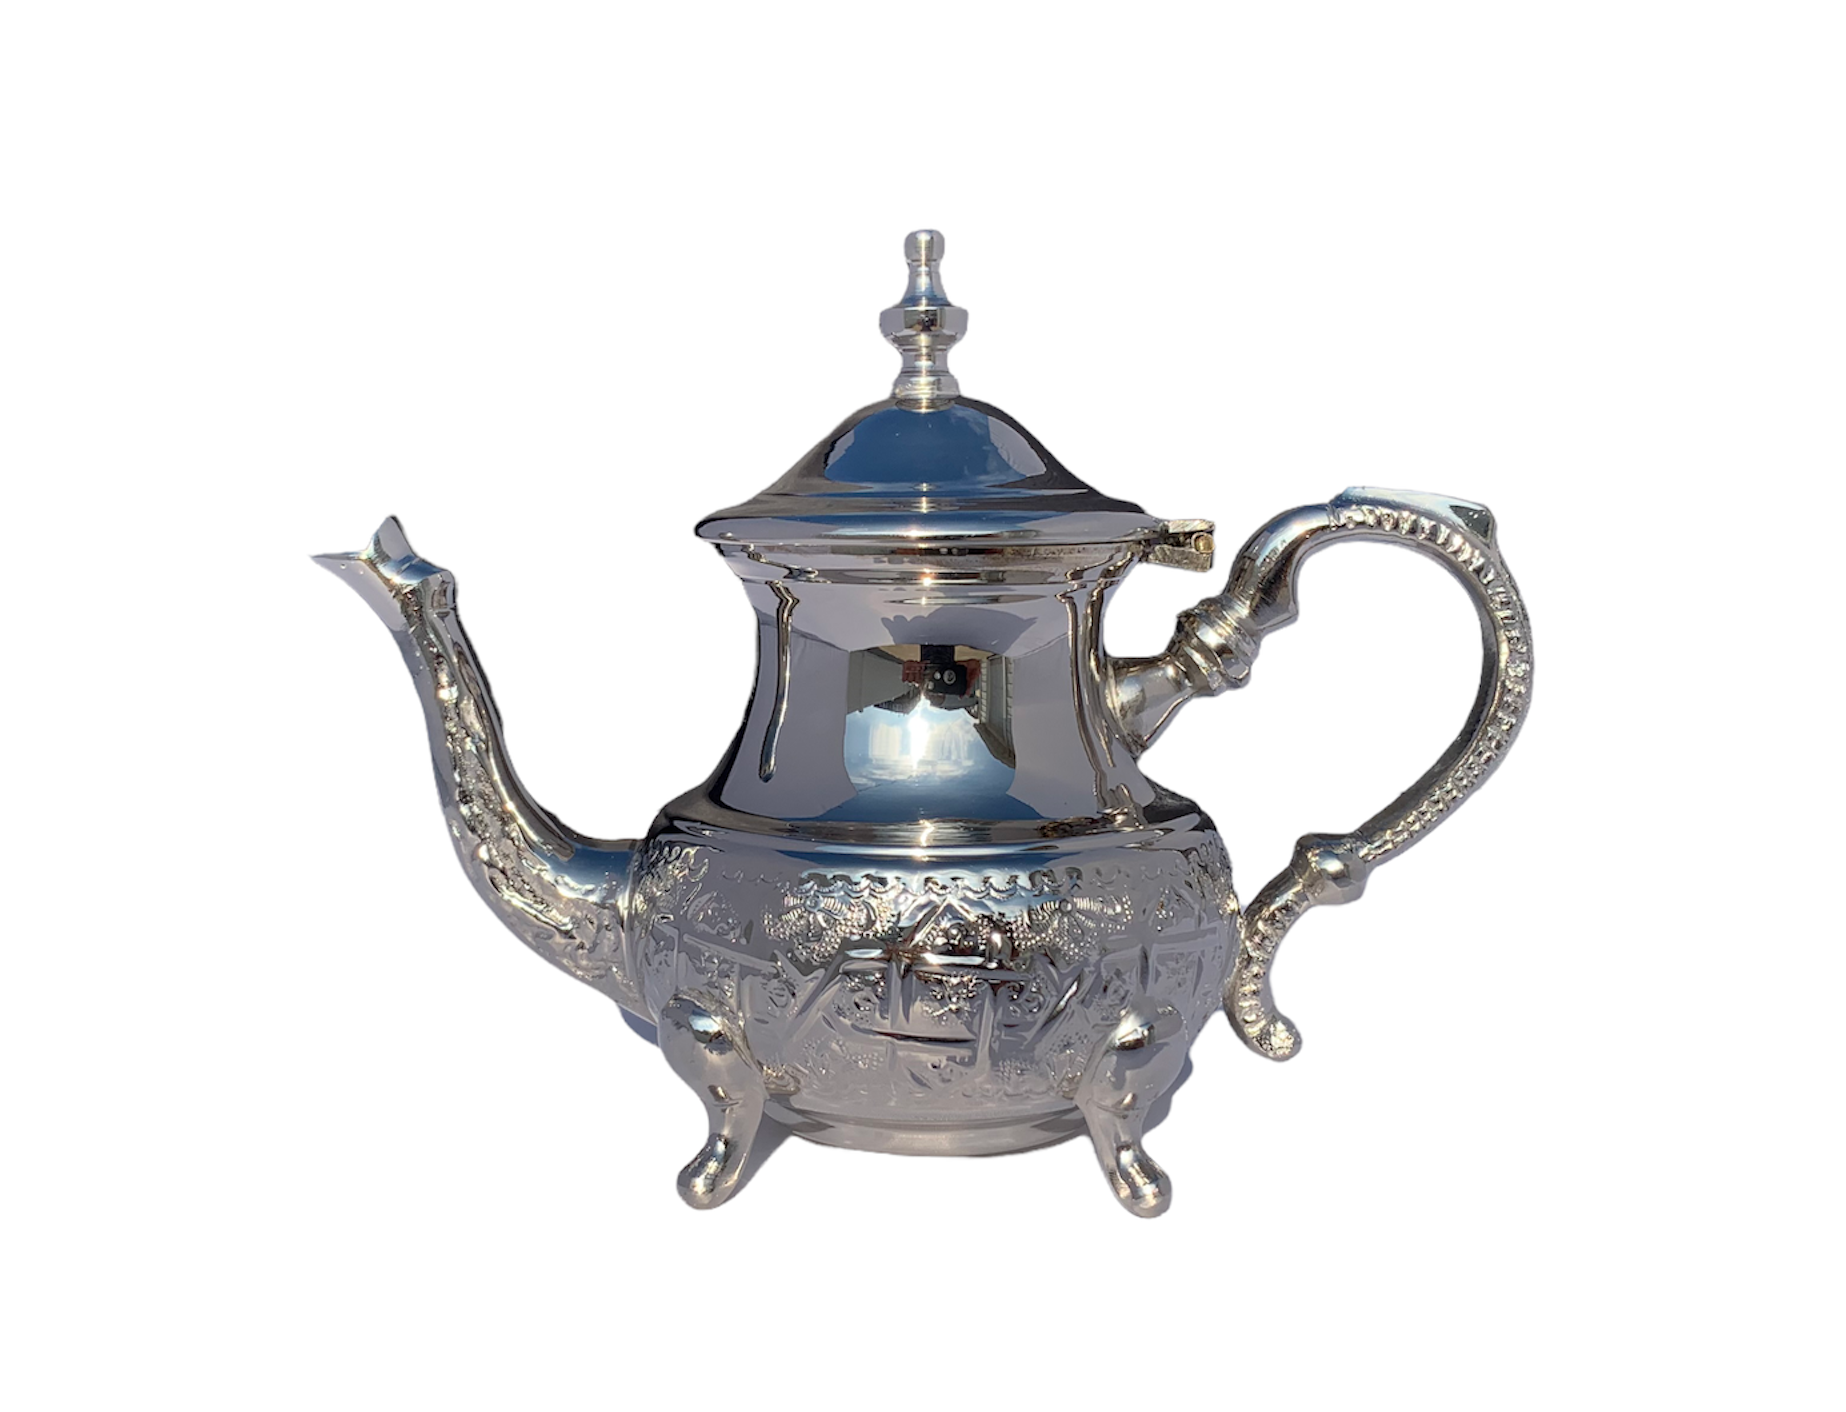 Imported Handmade Moroccan Teapot with Built In Tea Infuser Filter, Bring Home a Beautifully Functional Near East Tradition, 16 OZ. - Marrakesh Gardens